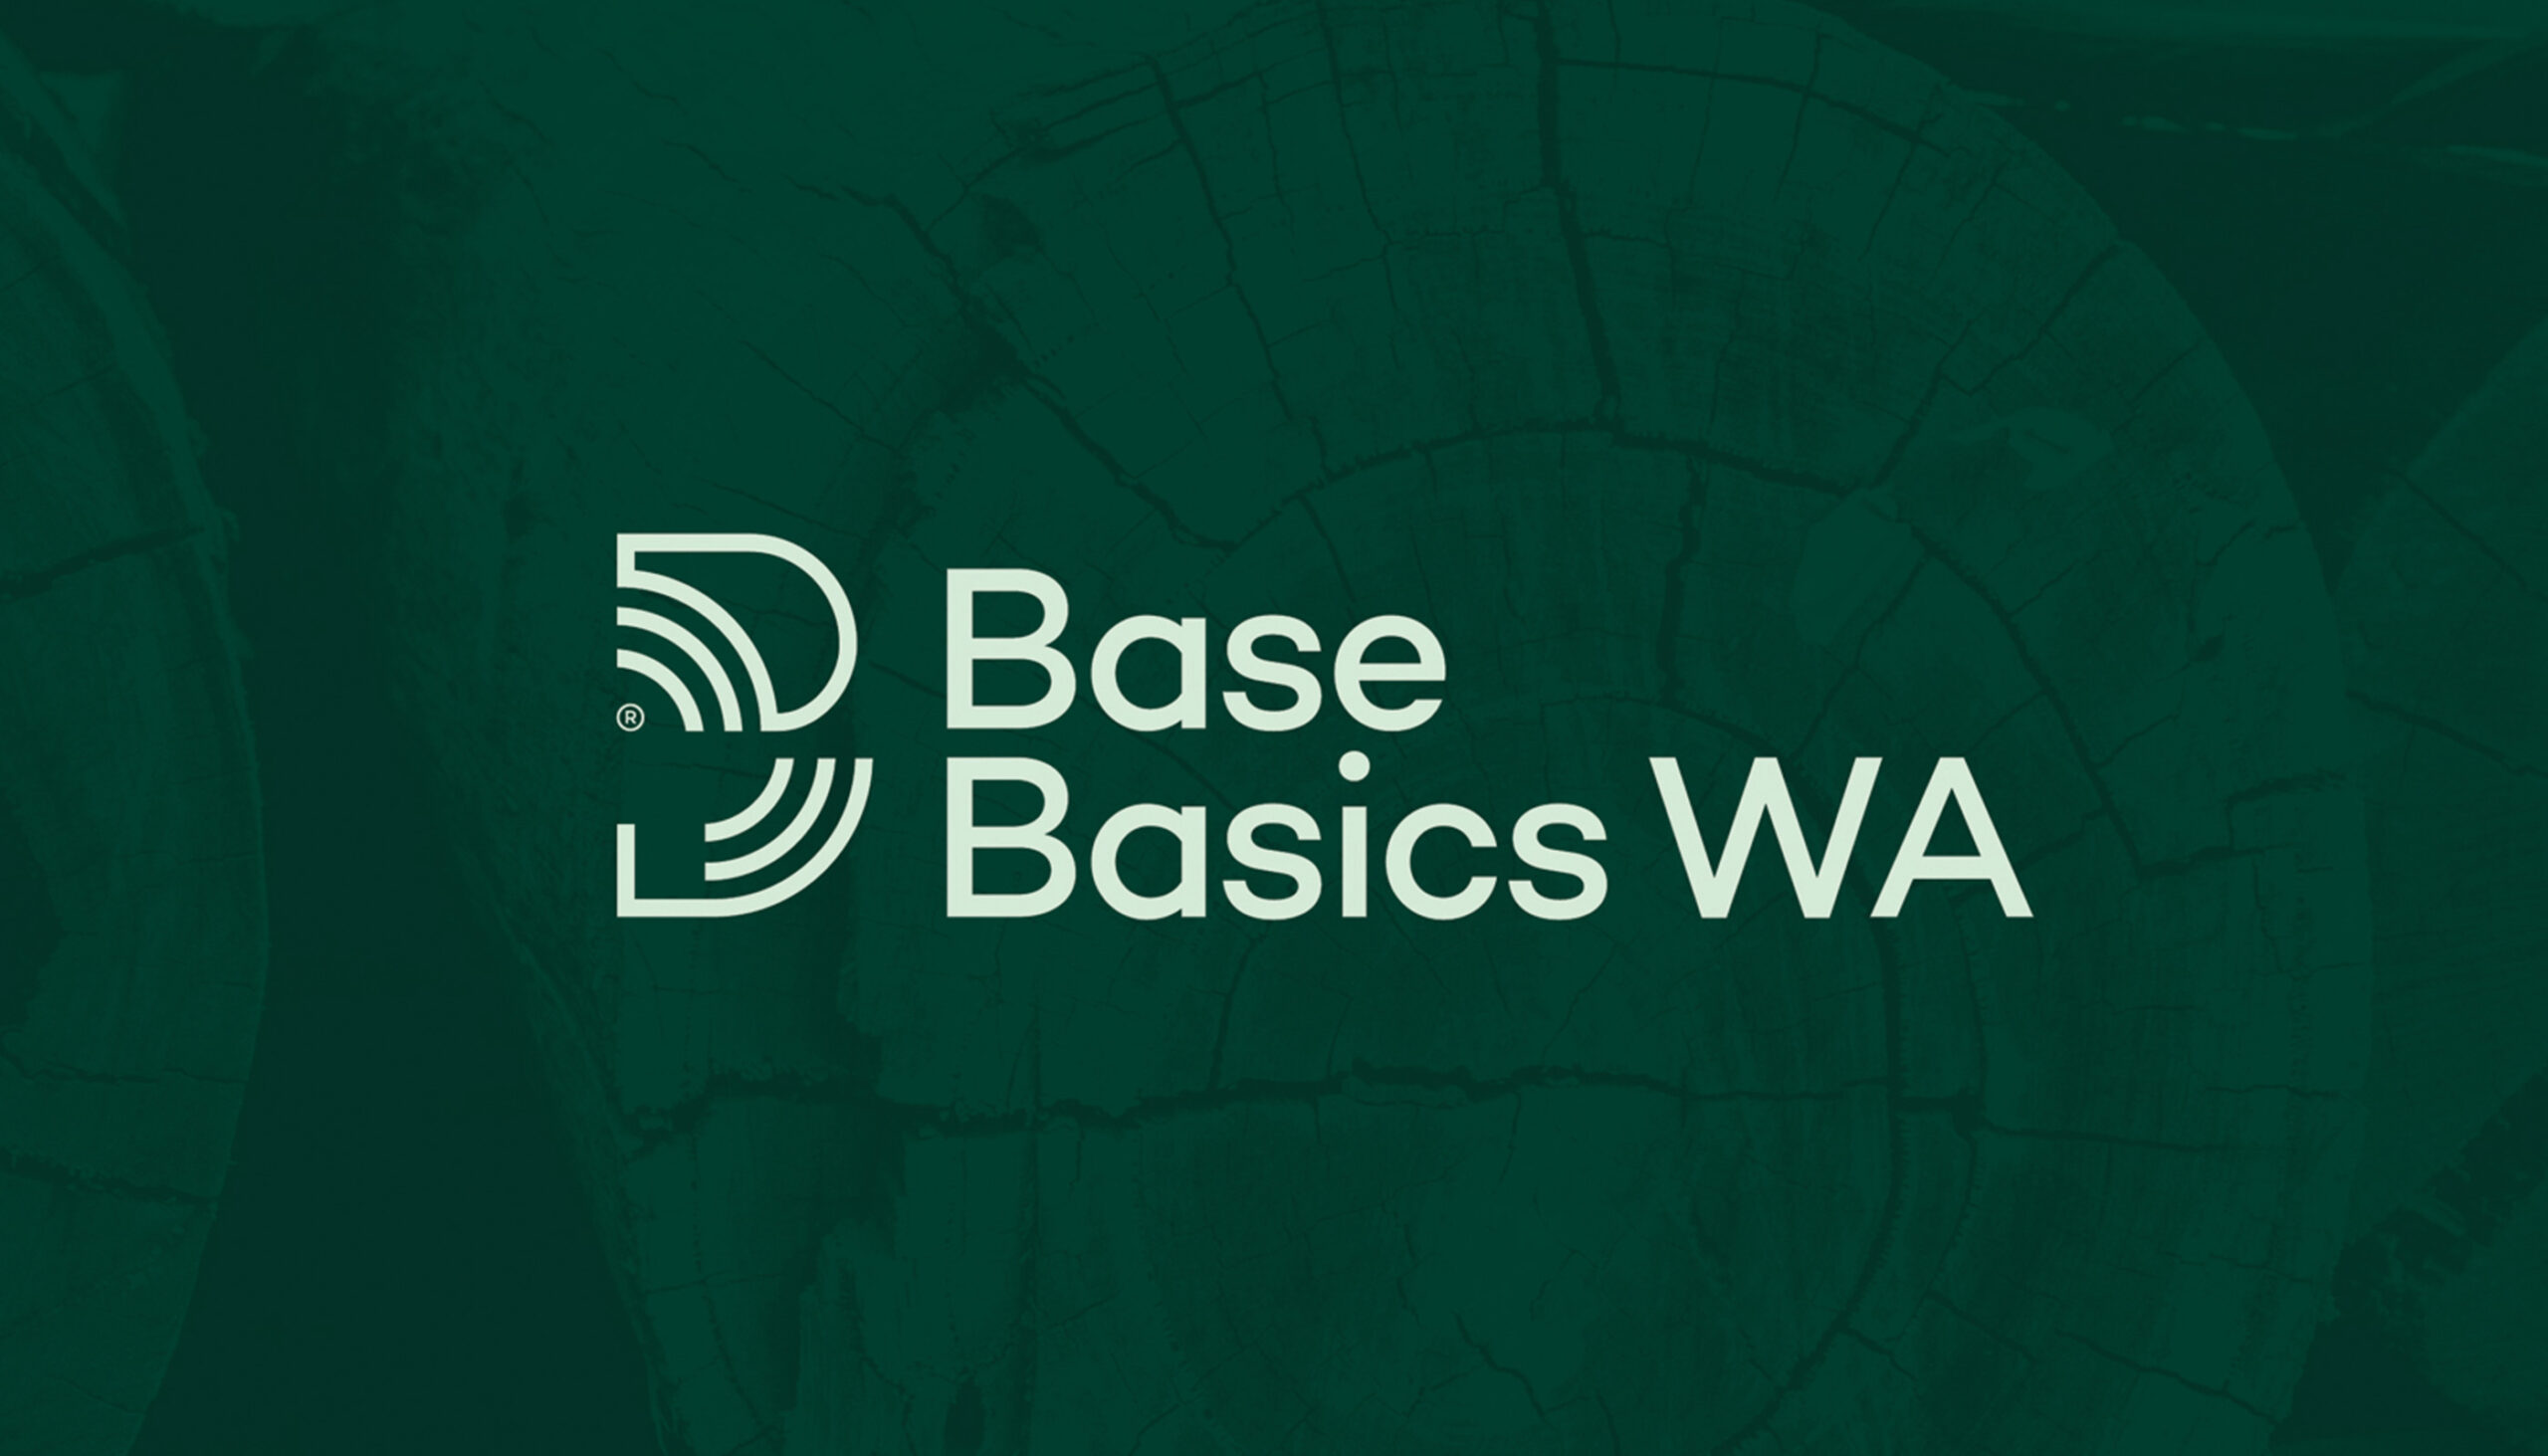 Base Basics WA, Graphic Design, Signage, Website and Branding Design and Development by TL Design Co.